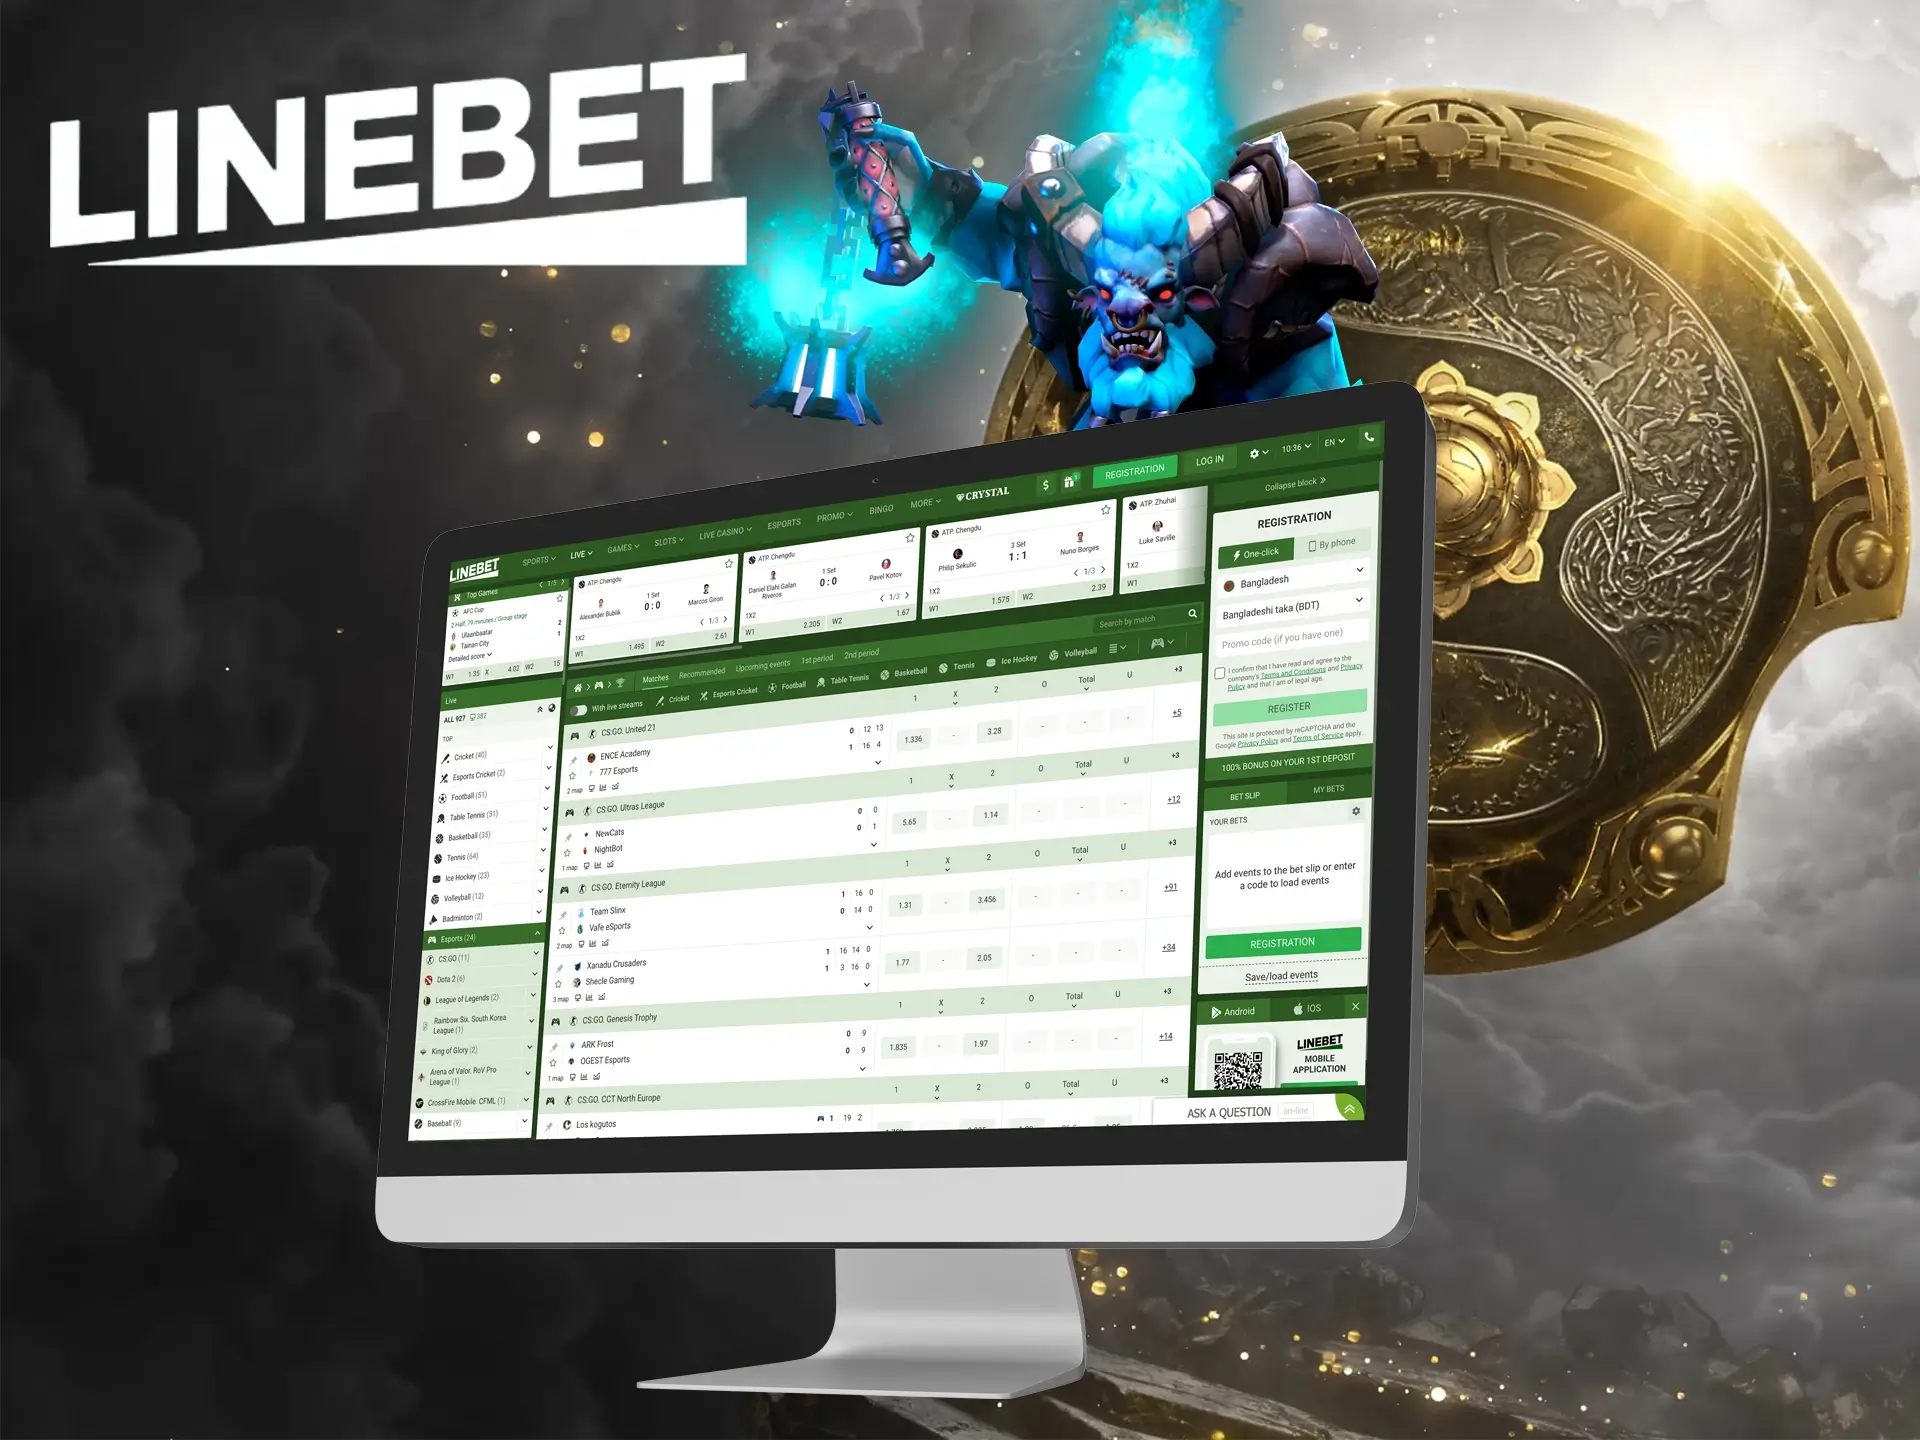 Determine your cyber sports bet at Linebet.